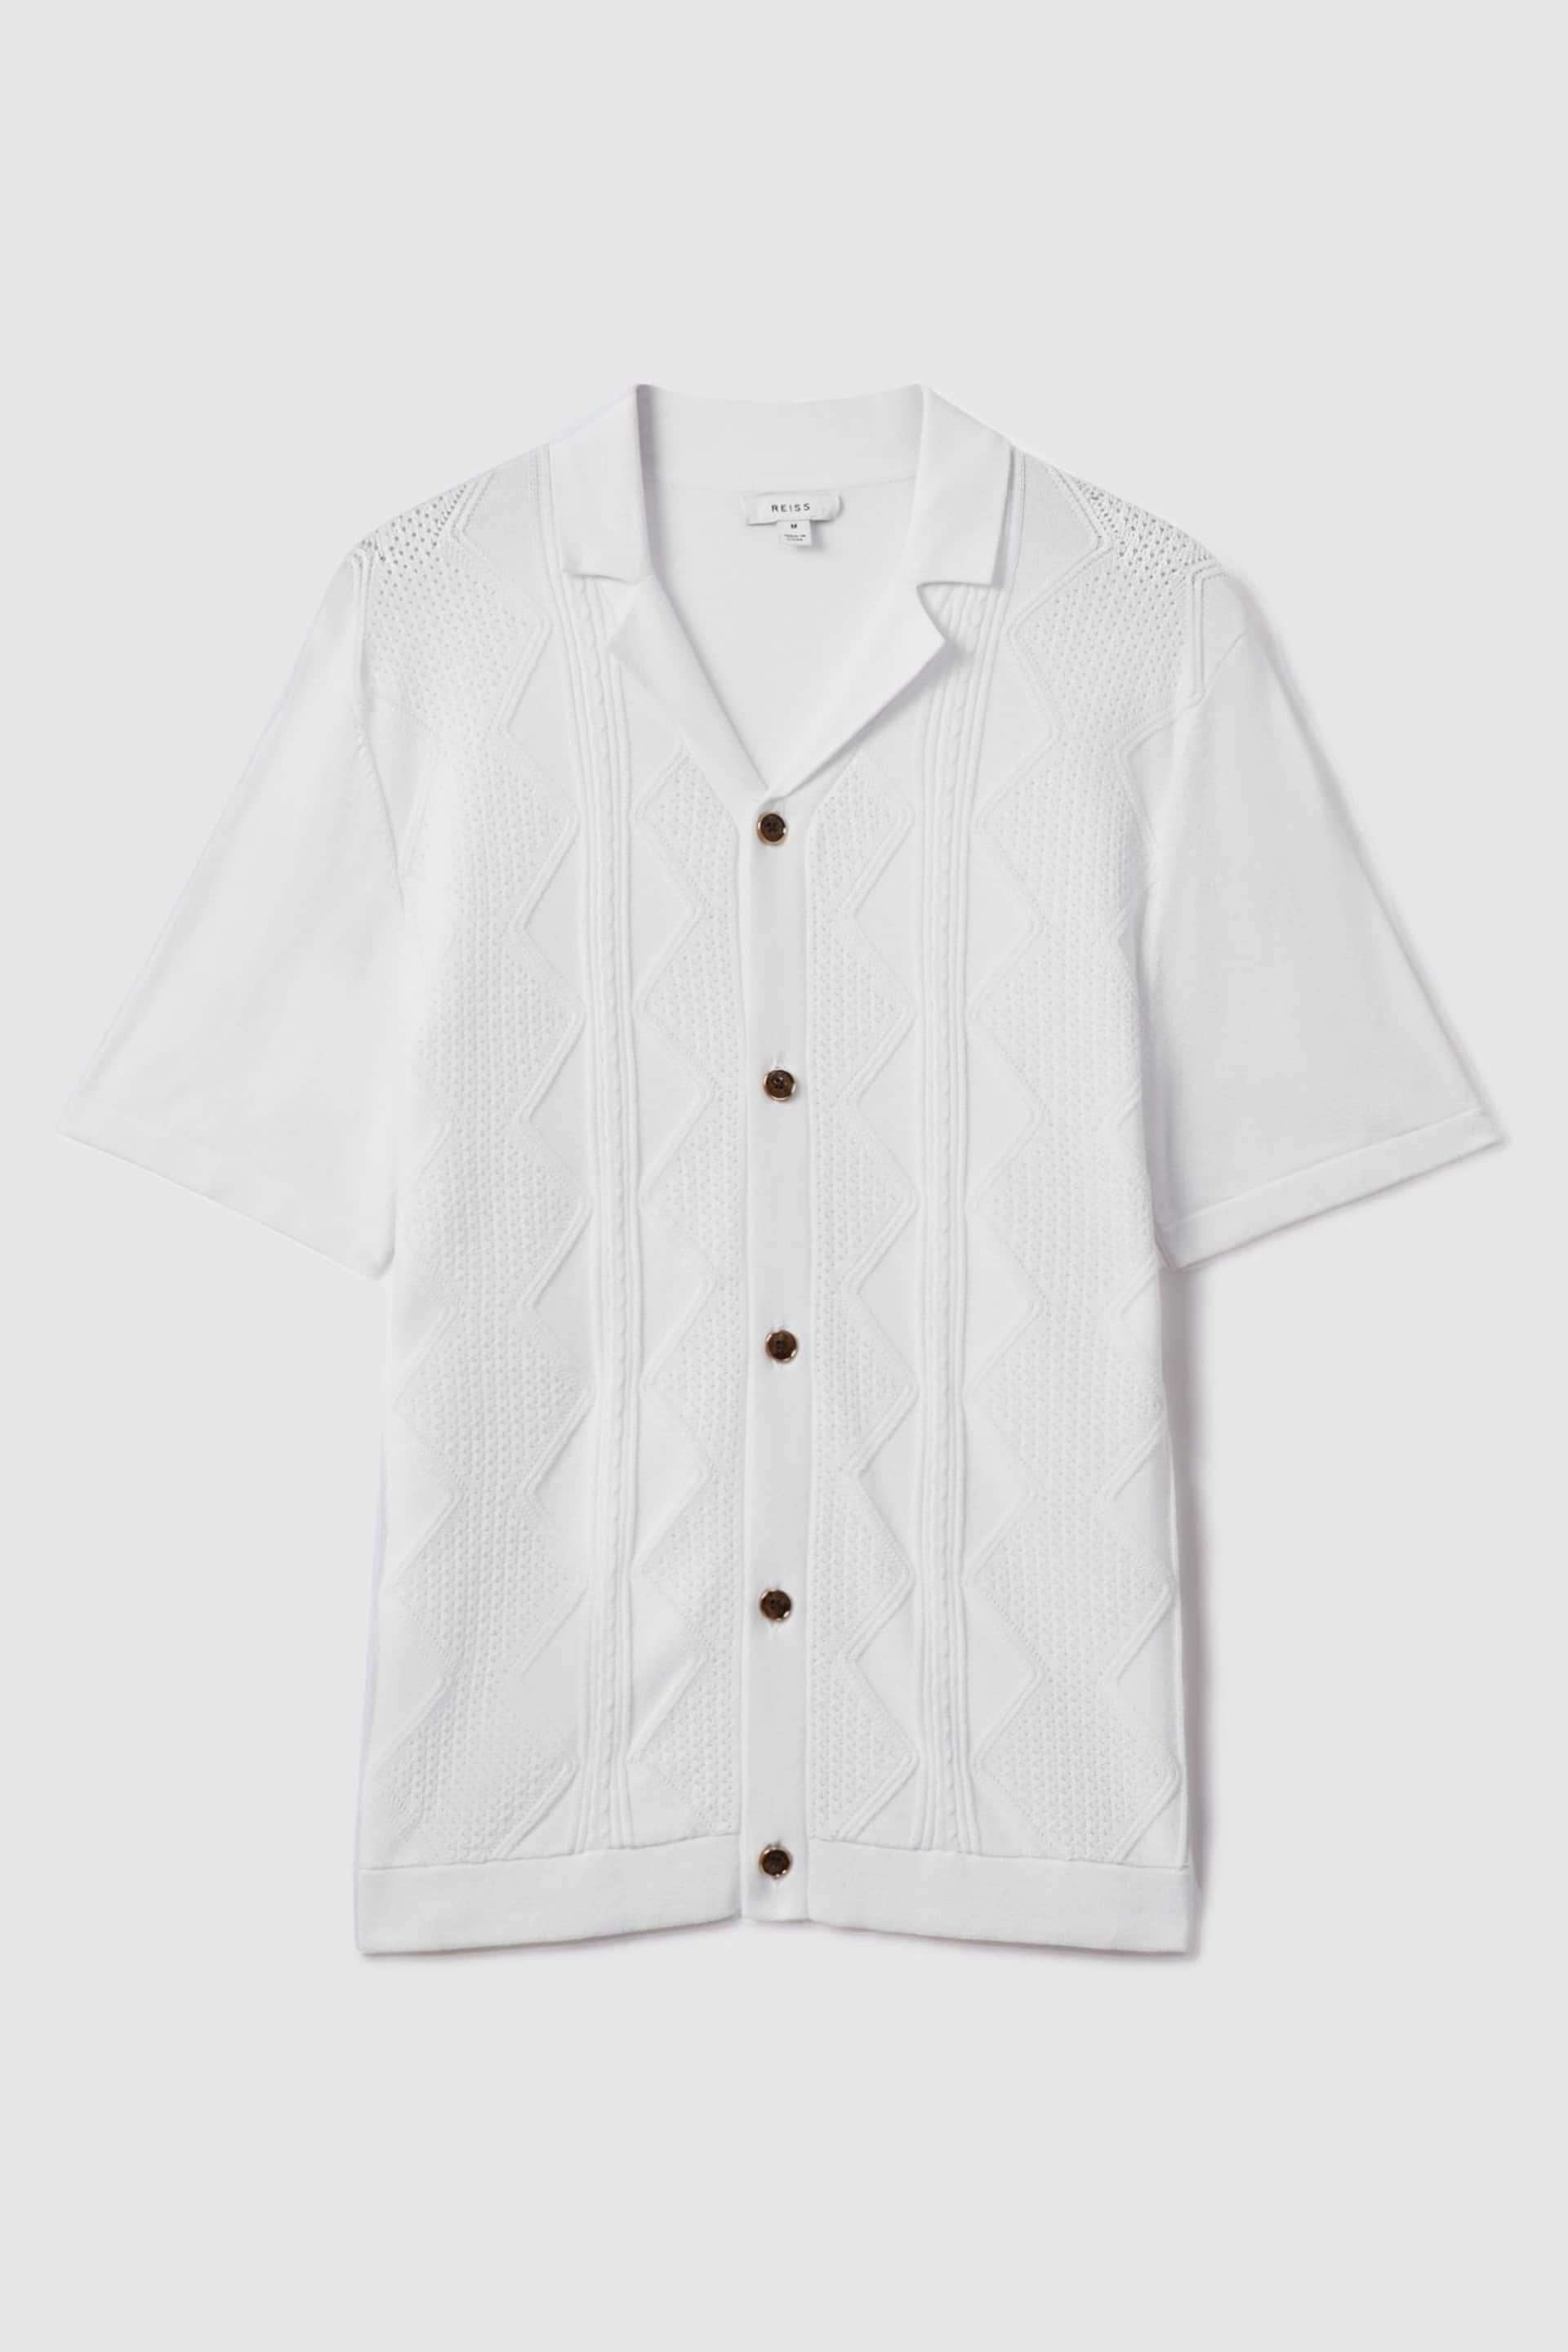 Reiss White Fortune Cable Knit Cuban Collar Shirt - Image 2 of 6